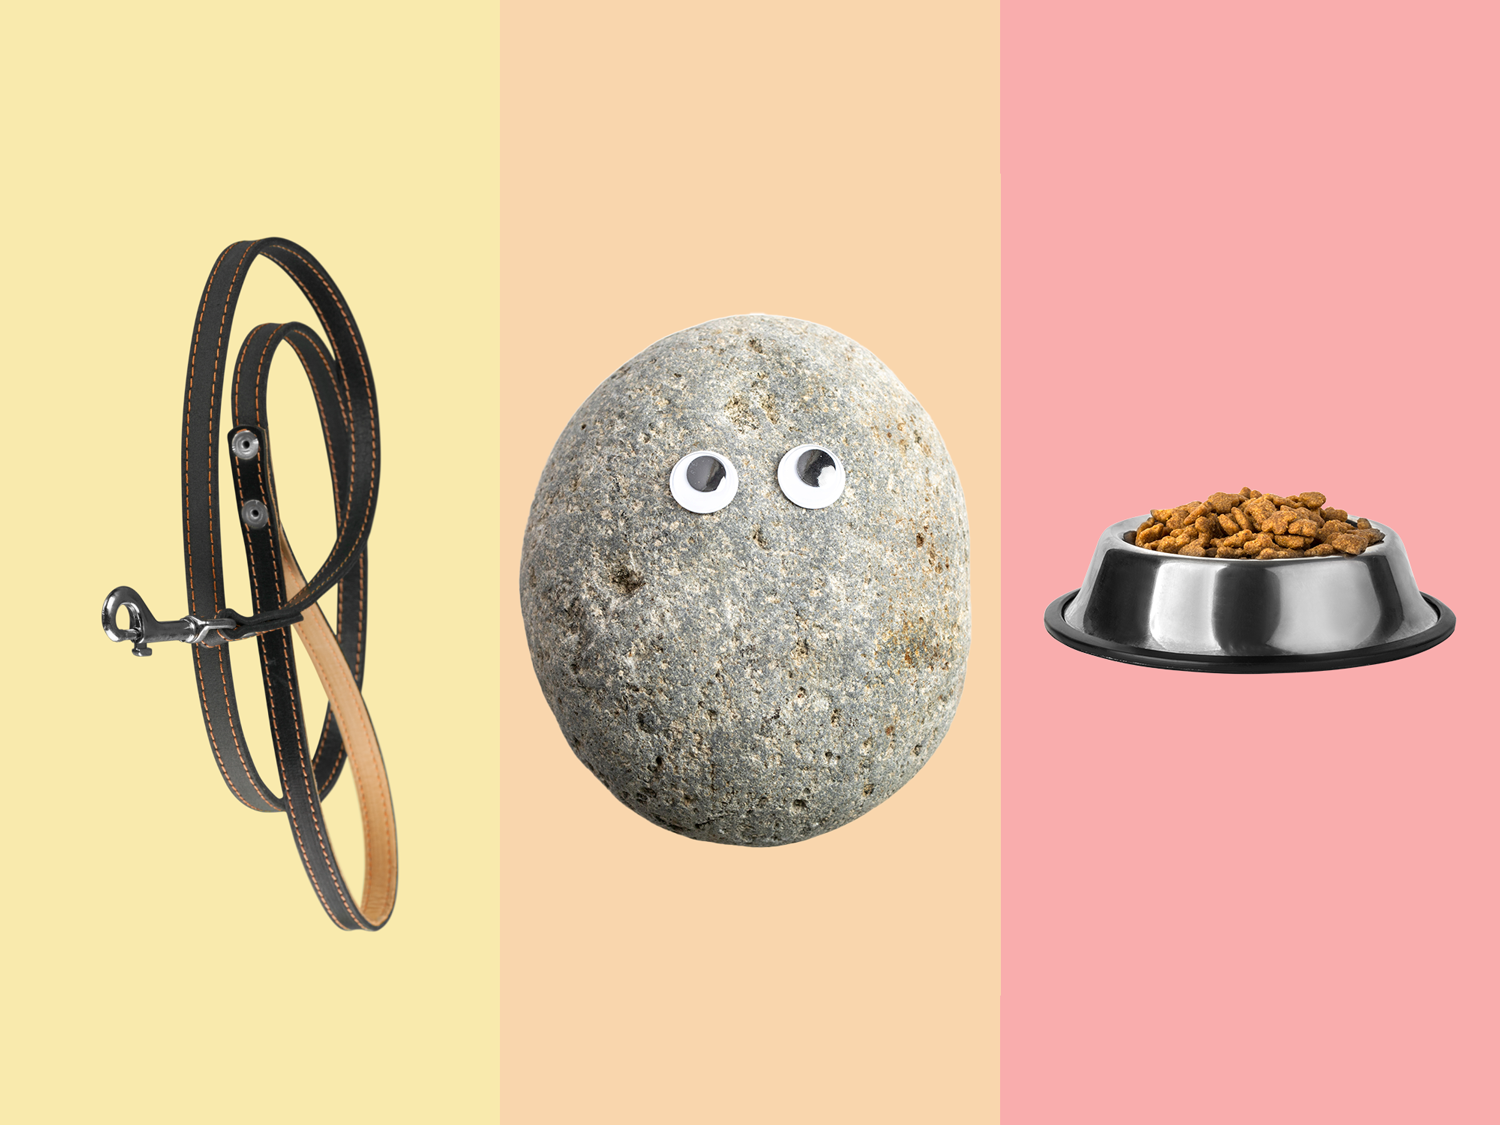 Three panels show a leash, a rock with googly eyes, and a dog bowl with dog food.